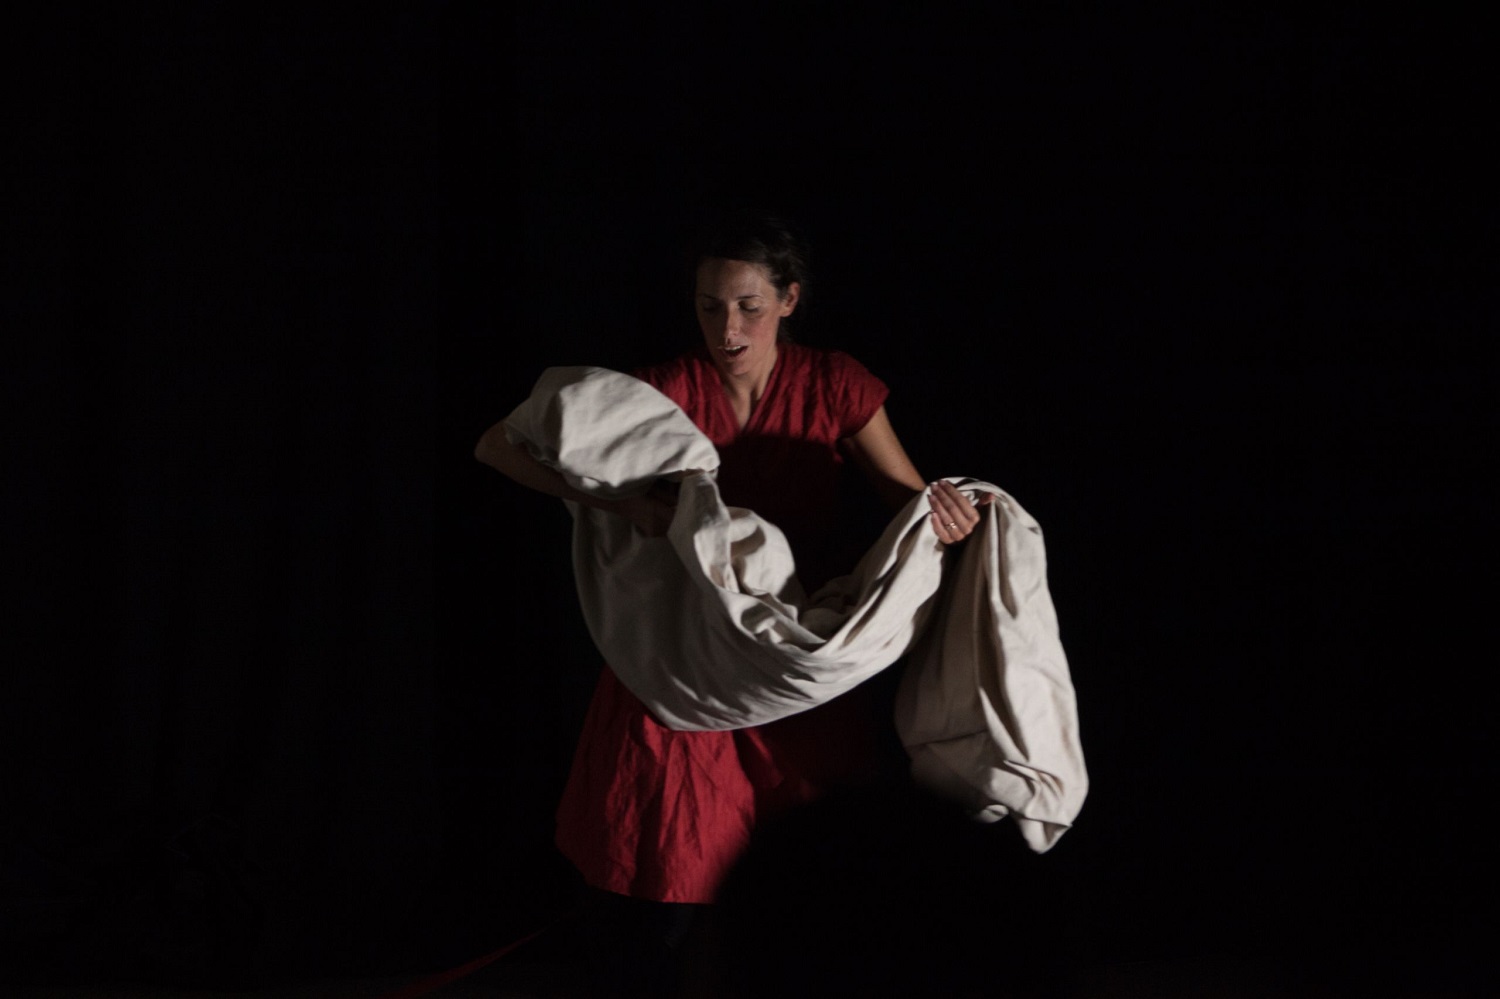 Joanne in a play stood against a black background carrying a sheet in her arms.